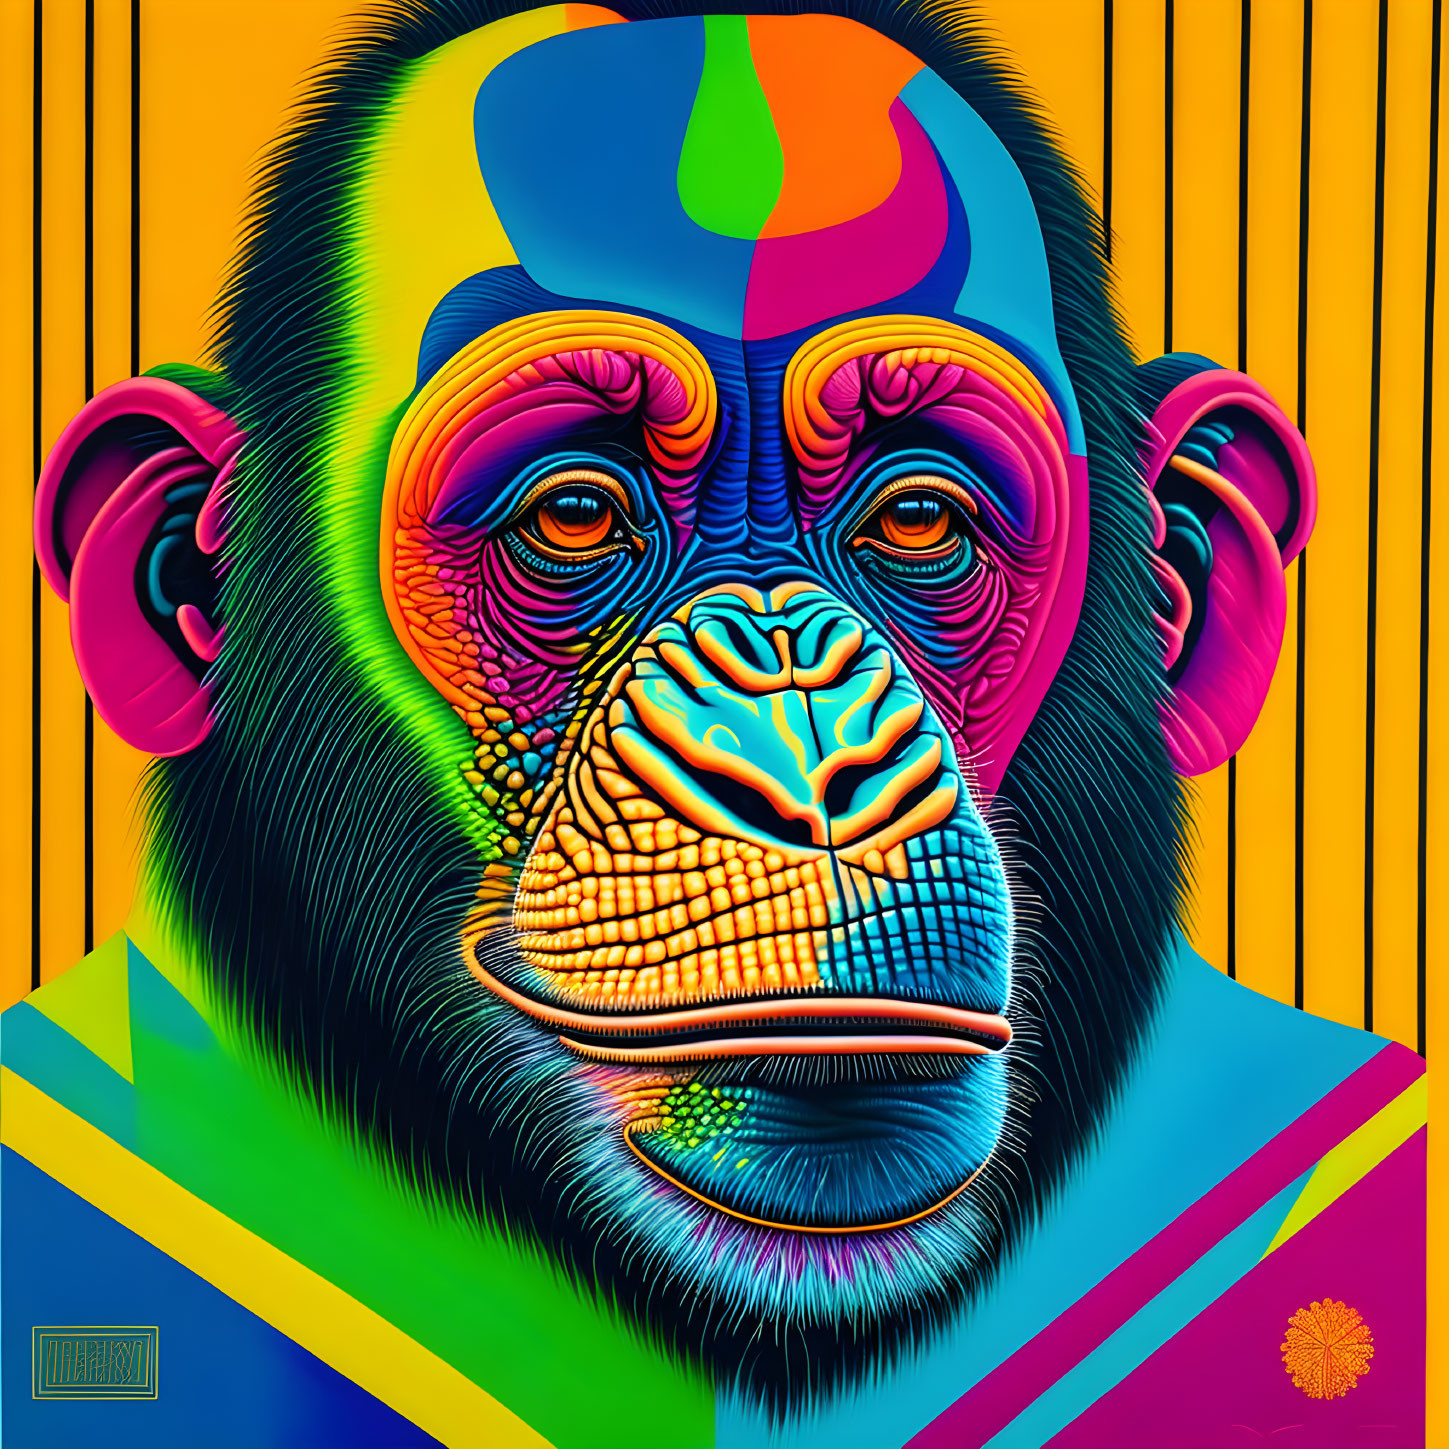 Colorful Pop Art Style Chimpanzee Face Illustration on Yellow Striped Background